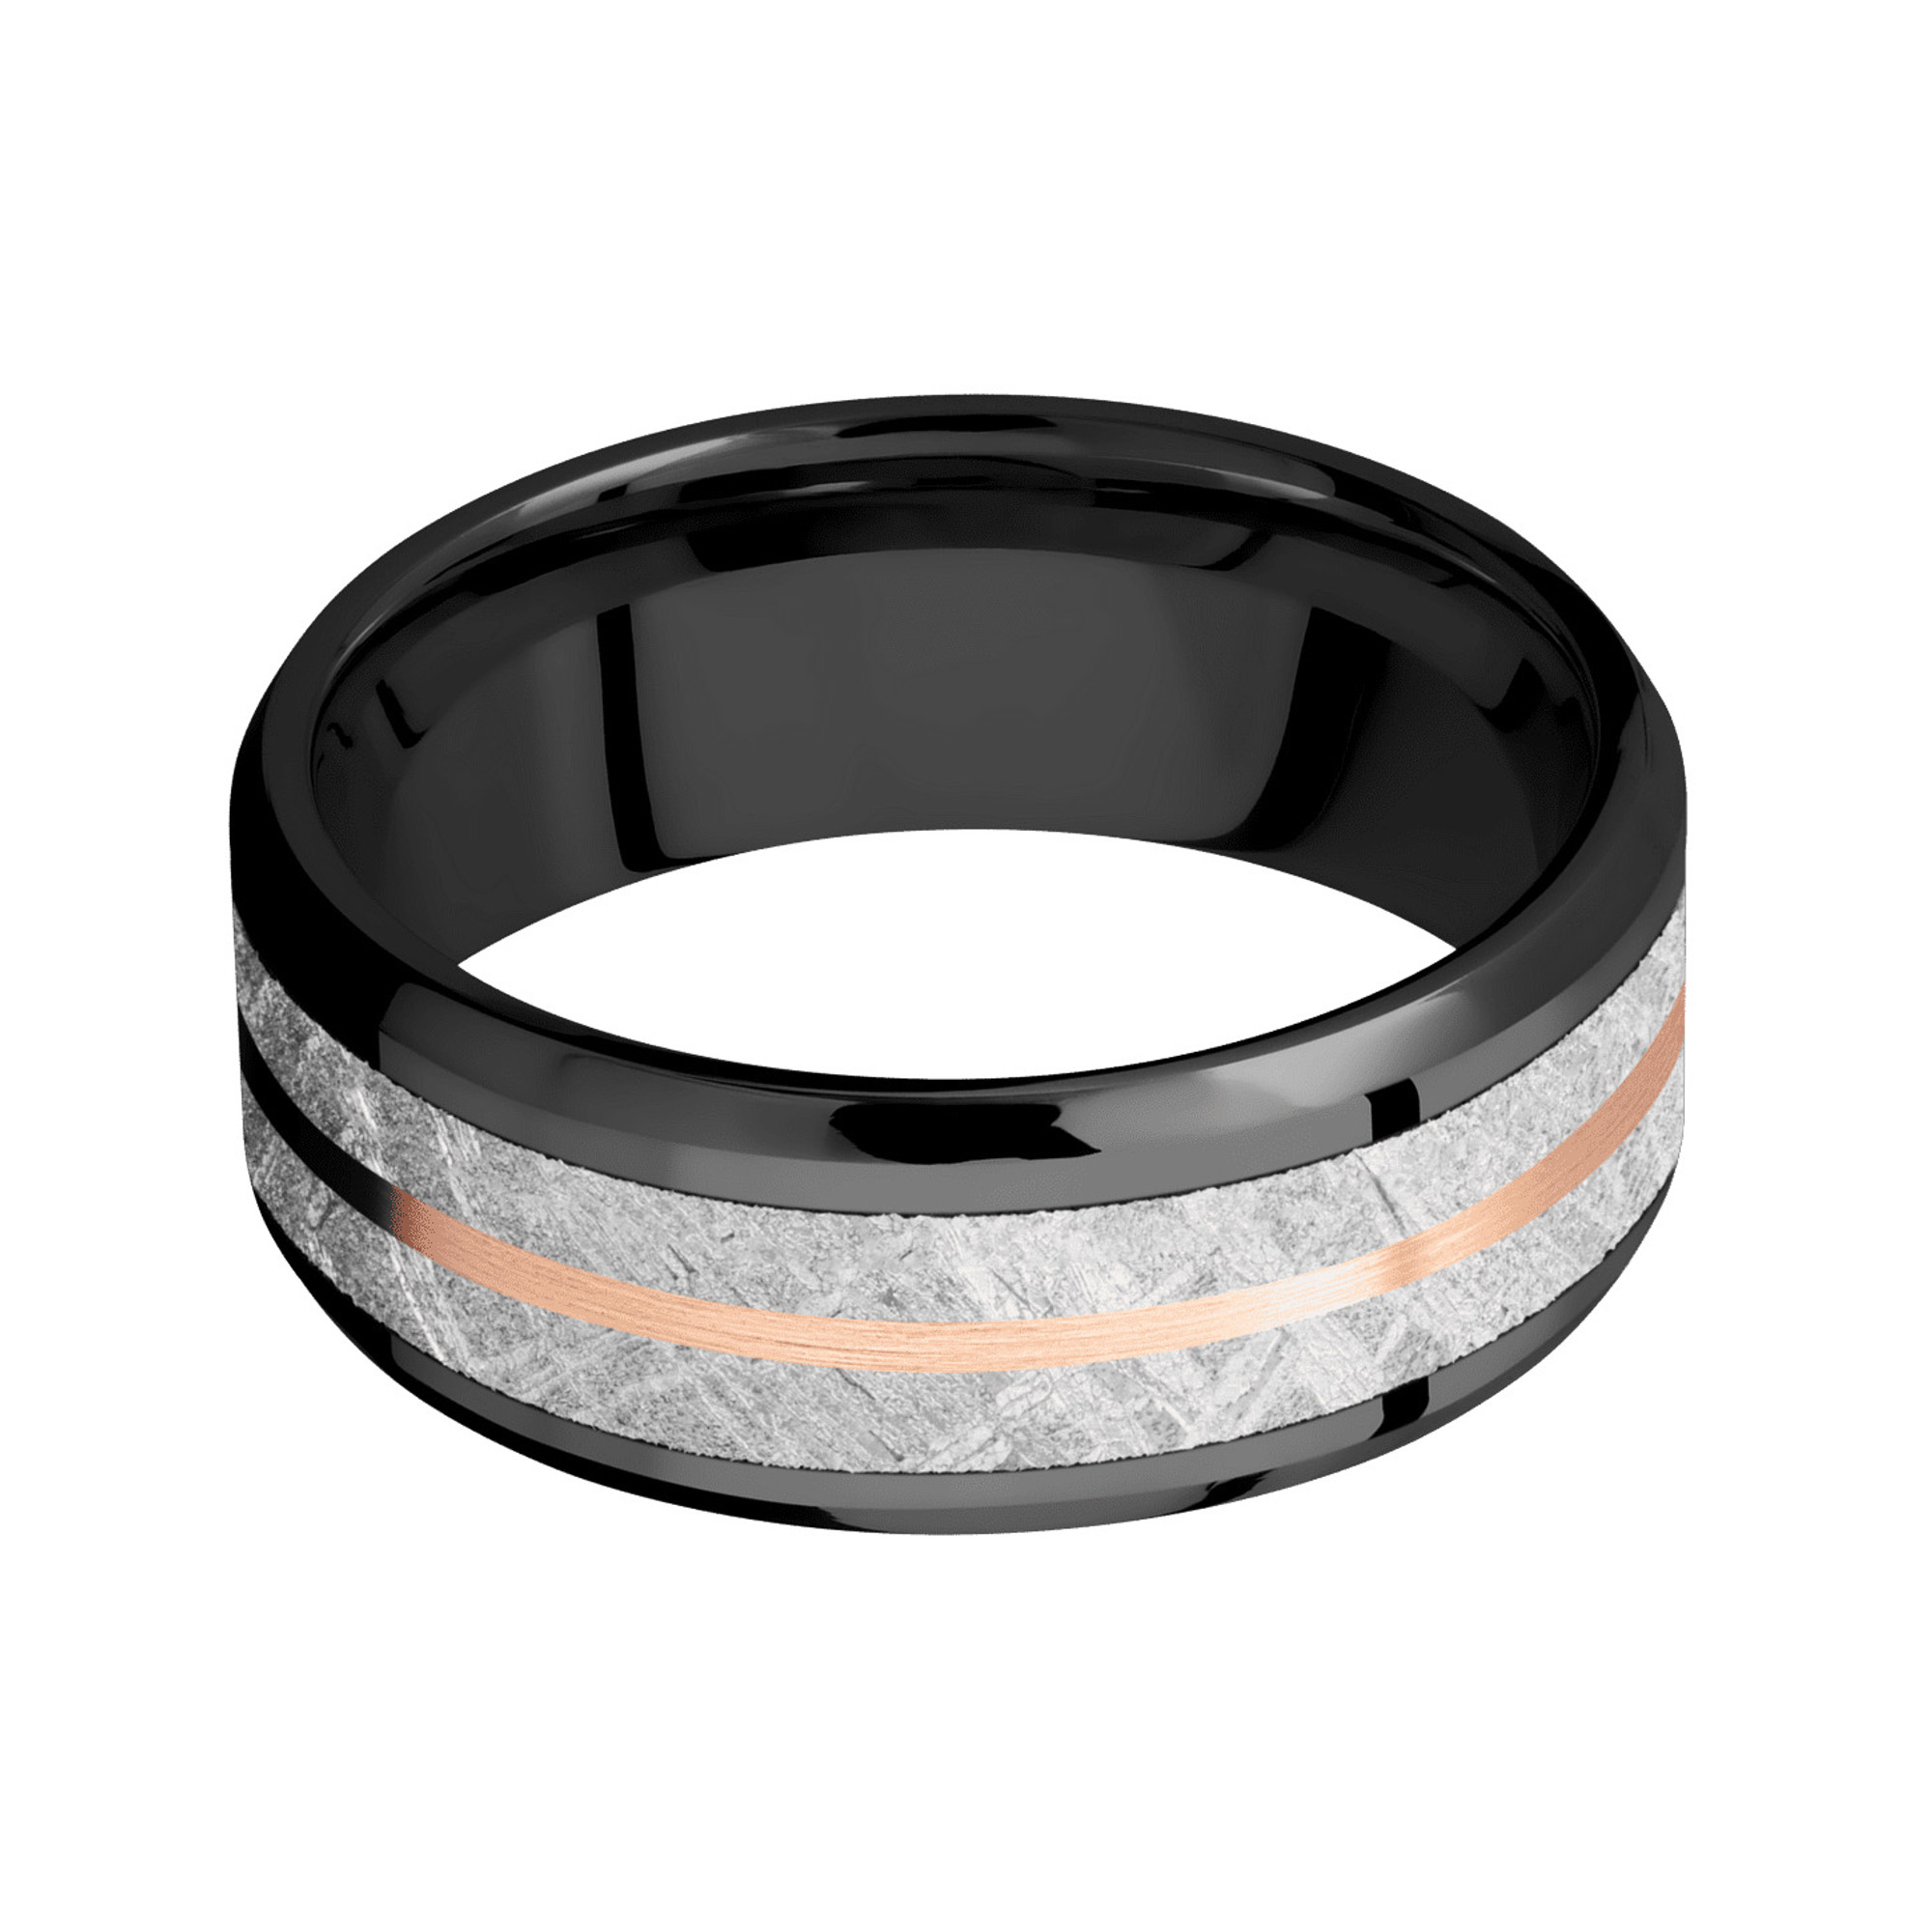 Zirconium, Rose gold and Gibeon Meteorite Band by Lashbrook Designs - Rings